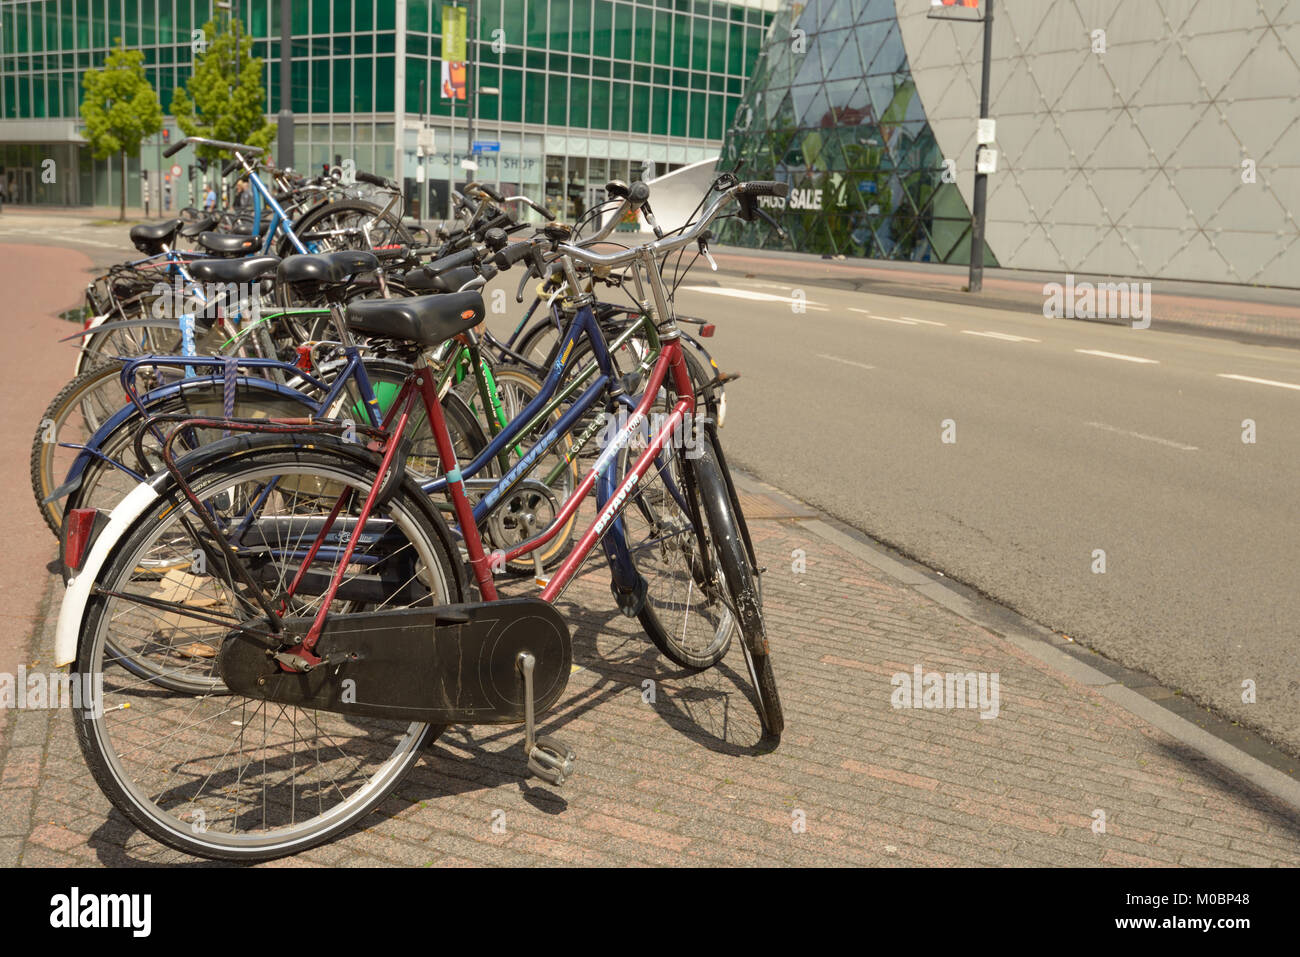 Eindhoven, Netherlands - June 23, 2013: Bicycle parking against the futuristic The Blob building. The bike is considered as an element of real Dutch l Stock Photo